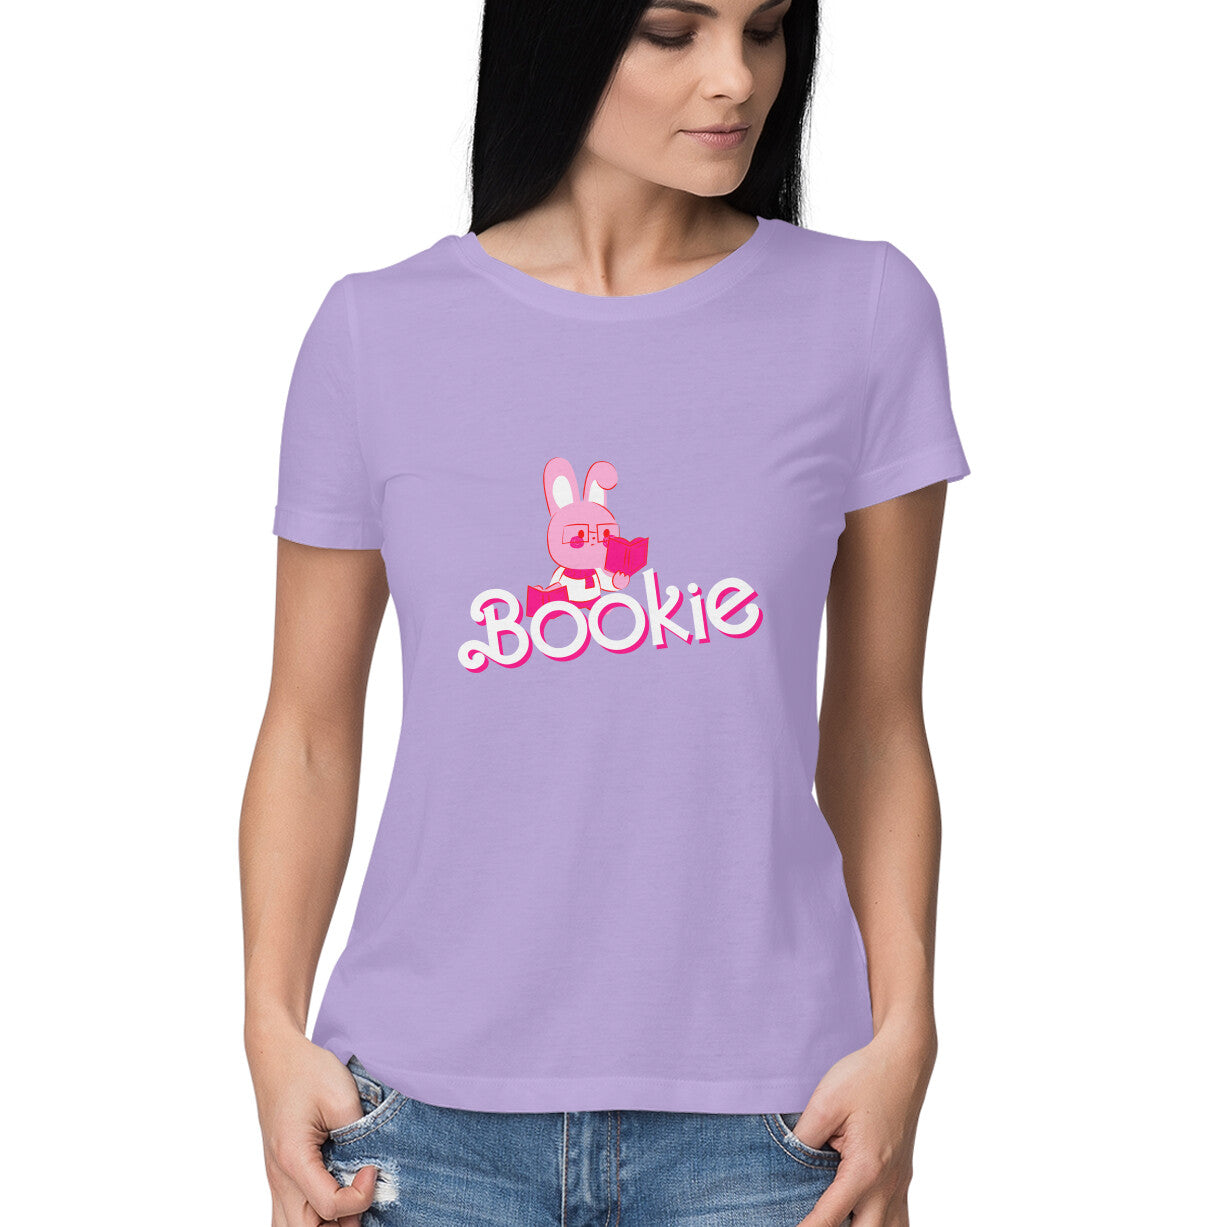 Book Lover's Barbie Tshirt for Bookie-sh Fans